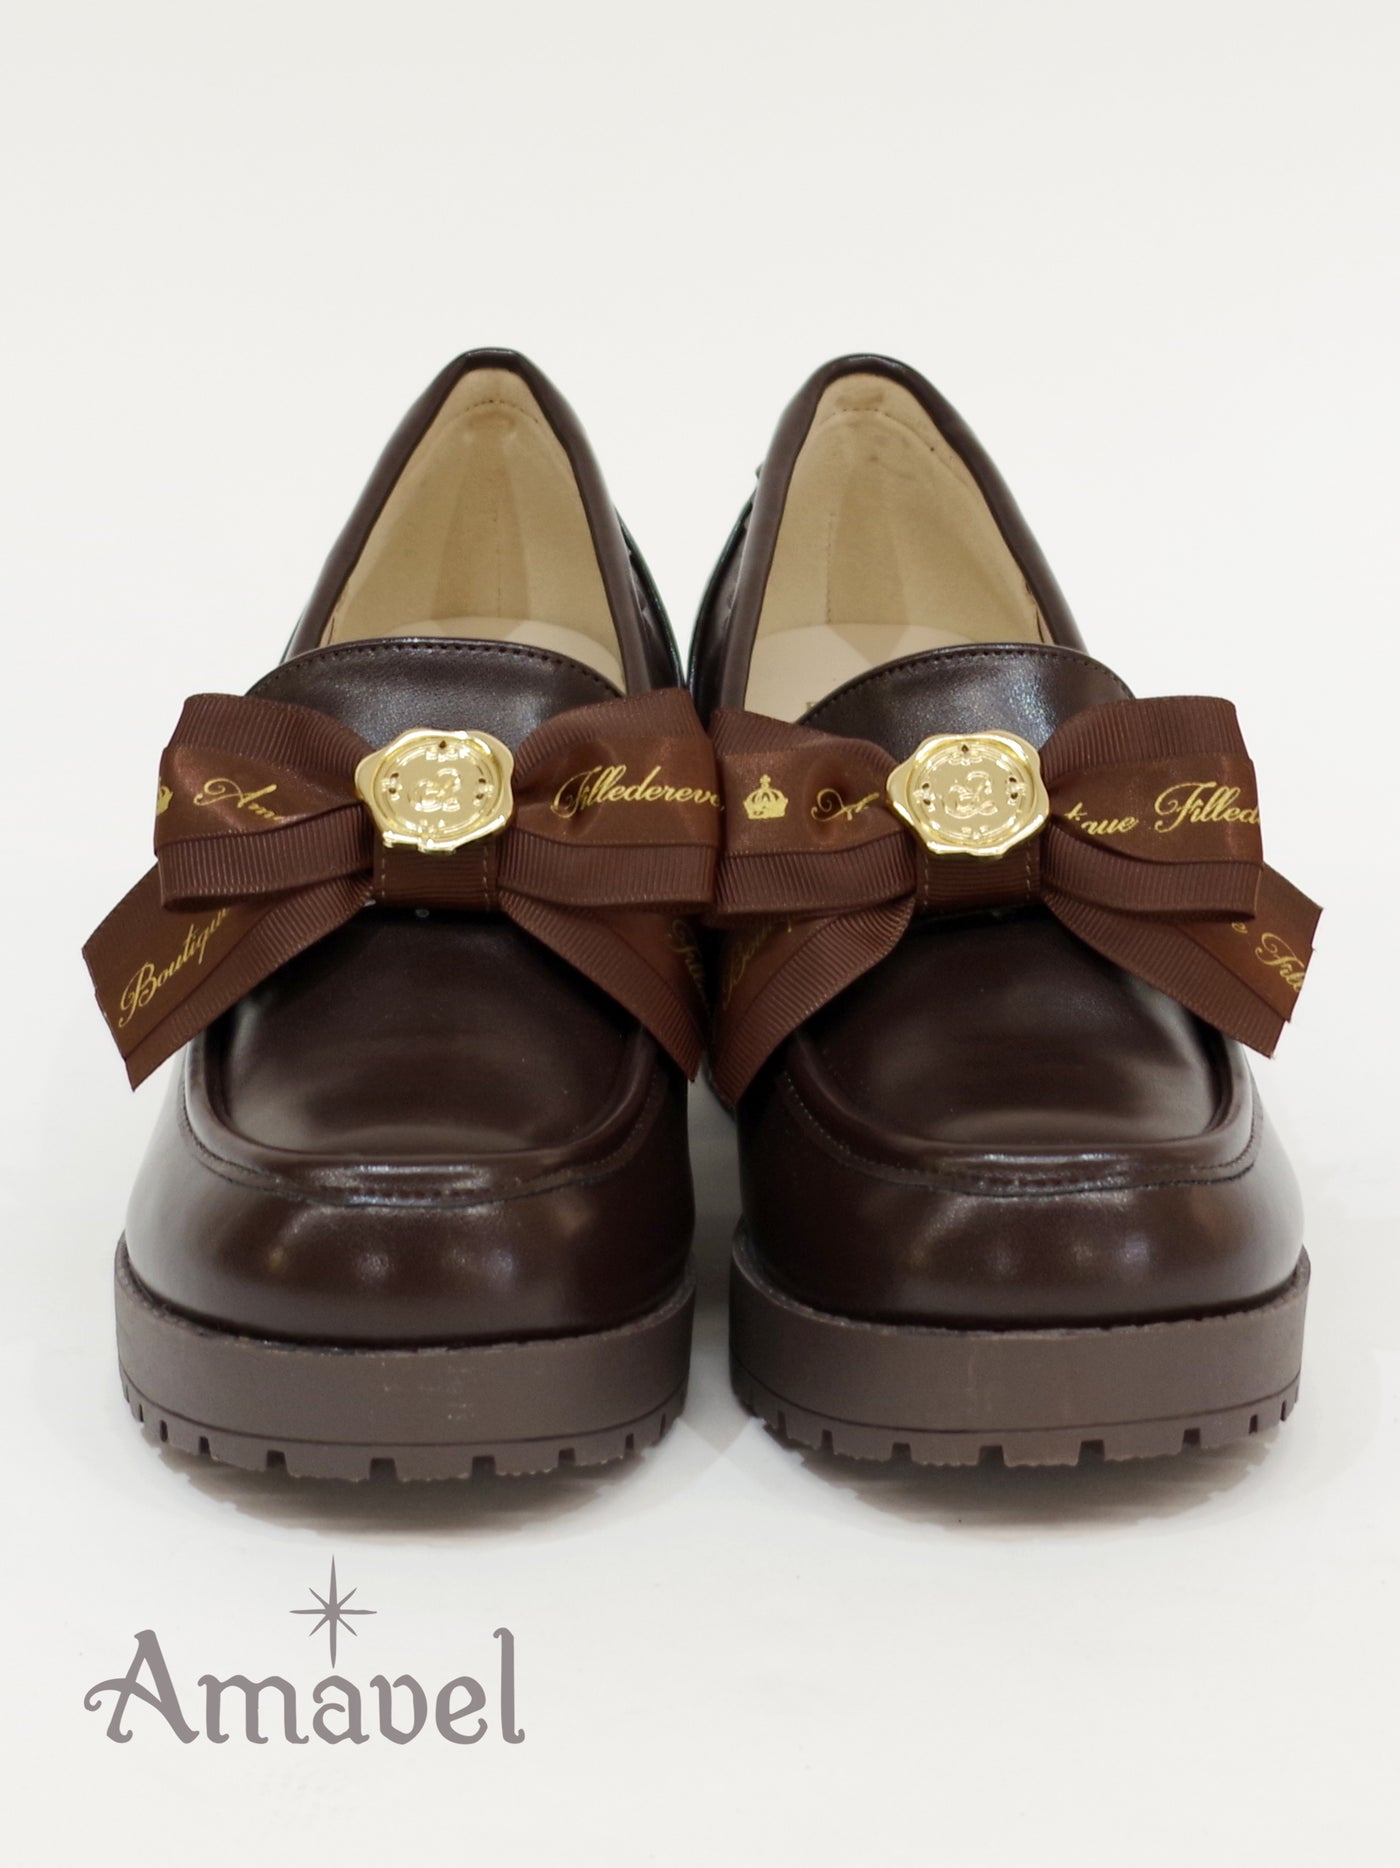 Loafer pumps with message ribbon